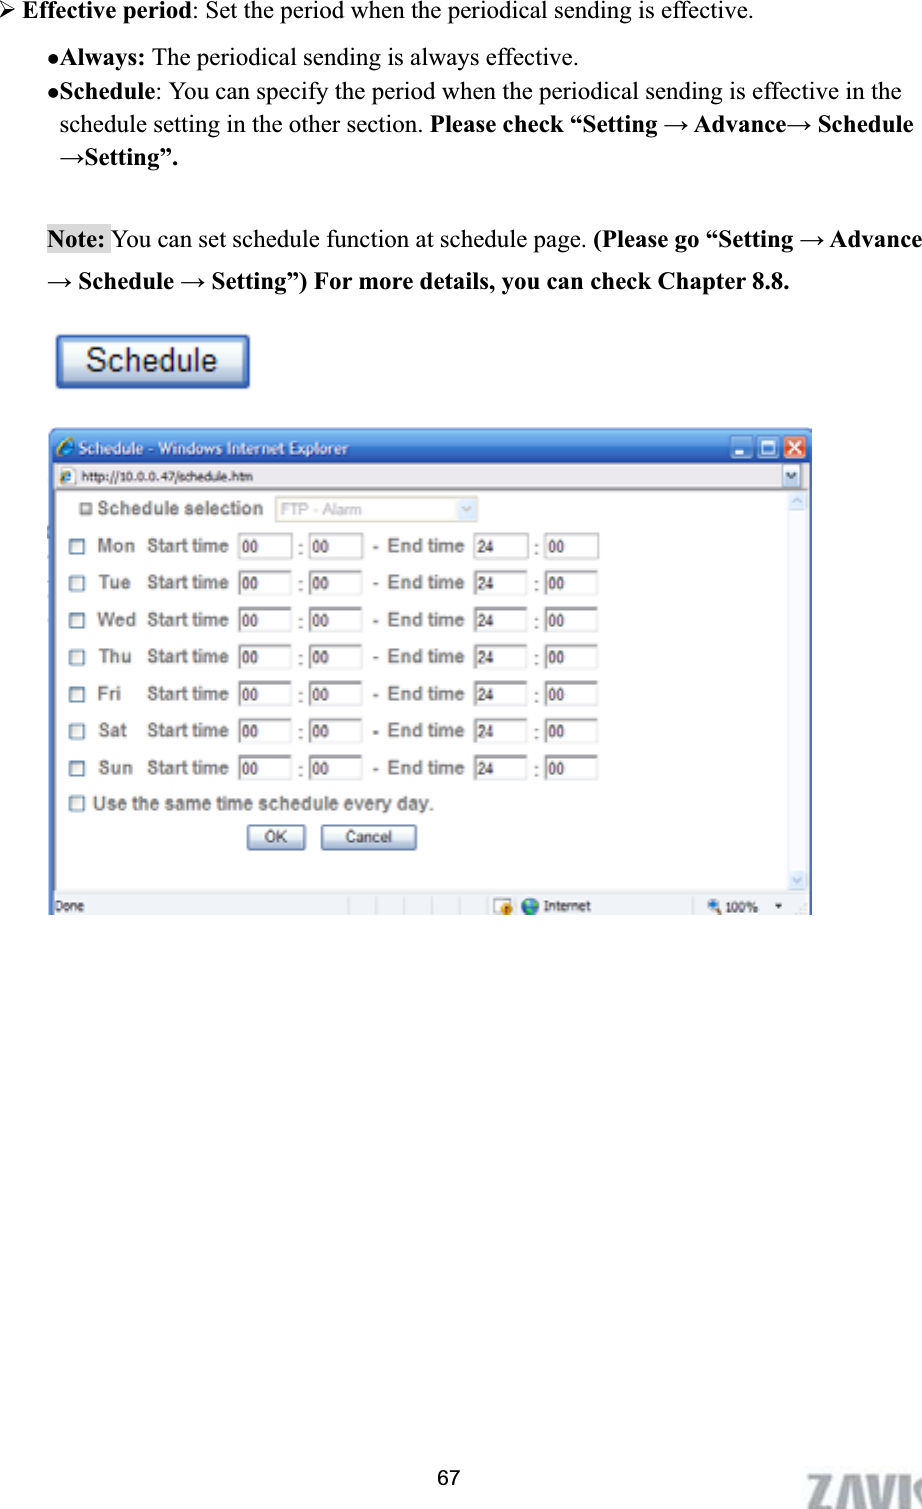      ¾Effective period: Set the period when the periodical sending is effective.   zAlways: The periodical sending is always effective. zSchedule: You can specify the period when the periodical sending is effective in the schedule setting in the other section. Please check “Setting ĺ Advanceĺ Schedule ĺSetting”.Note: You can set schedule function at schedule page. (Please go “Setting ĺ Advance ĺ Schedule ĺ Setting”) For more details, you can check Chapter 8.8. 67